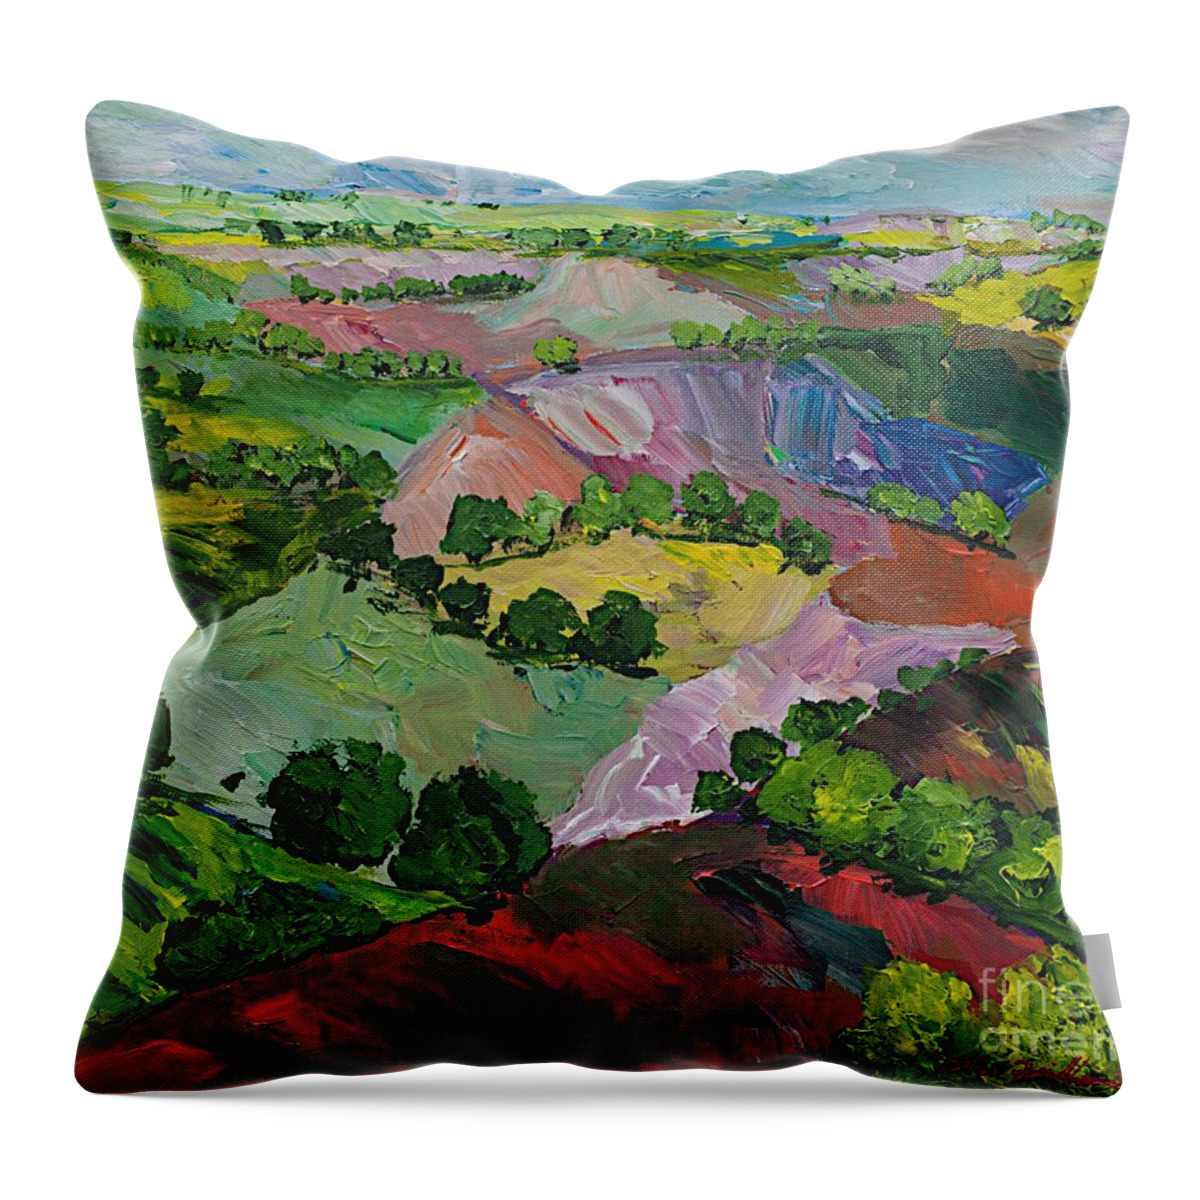 Landscape Throw Pillow featuring the painting Deep Ridge Red Hill by Allan P Friedlander